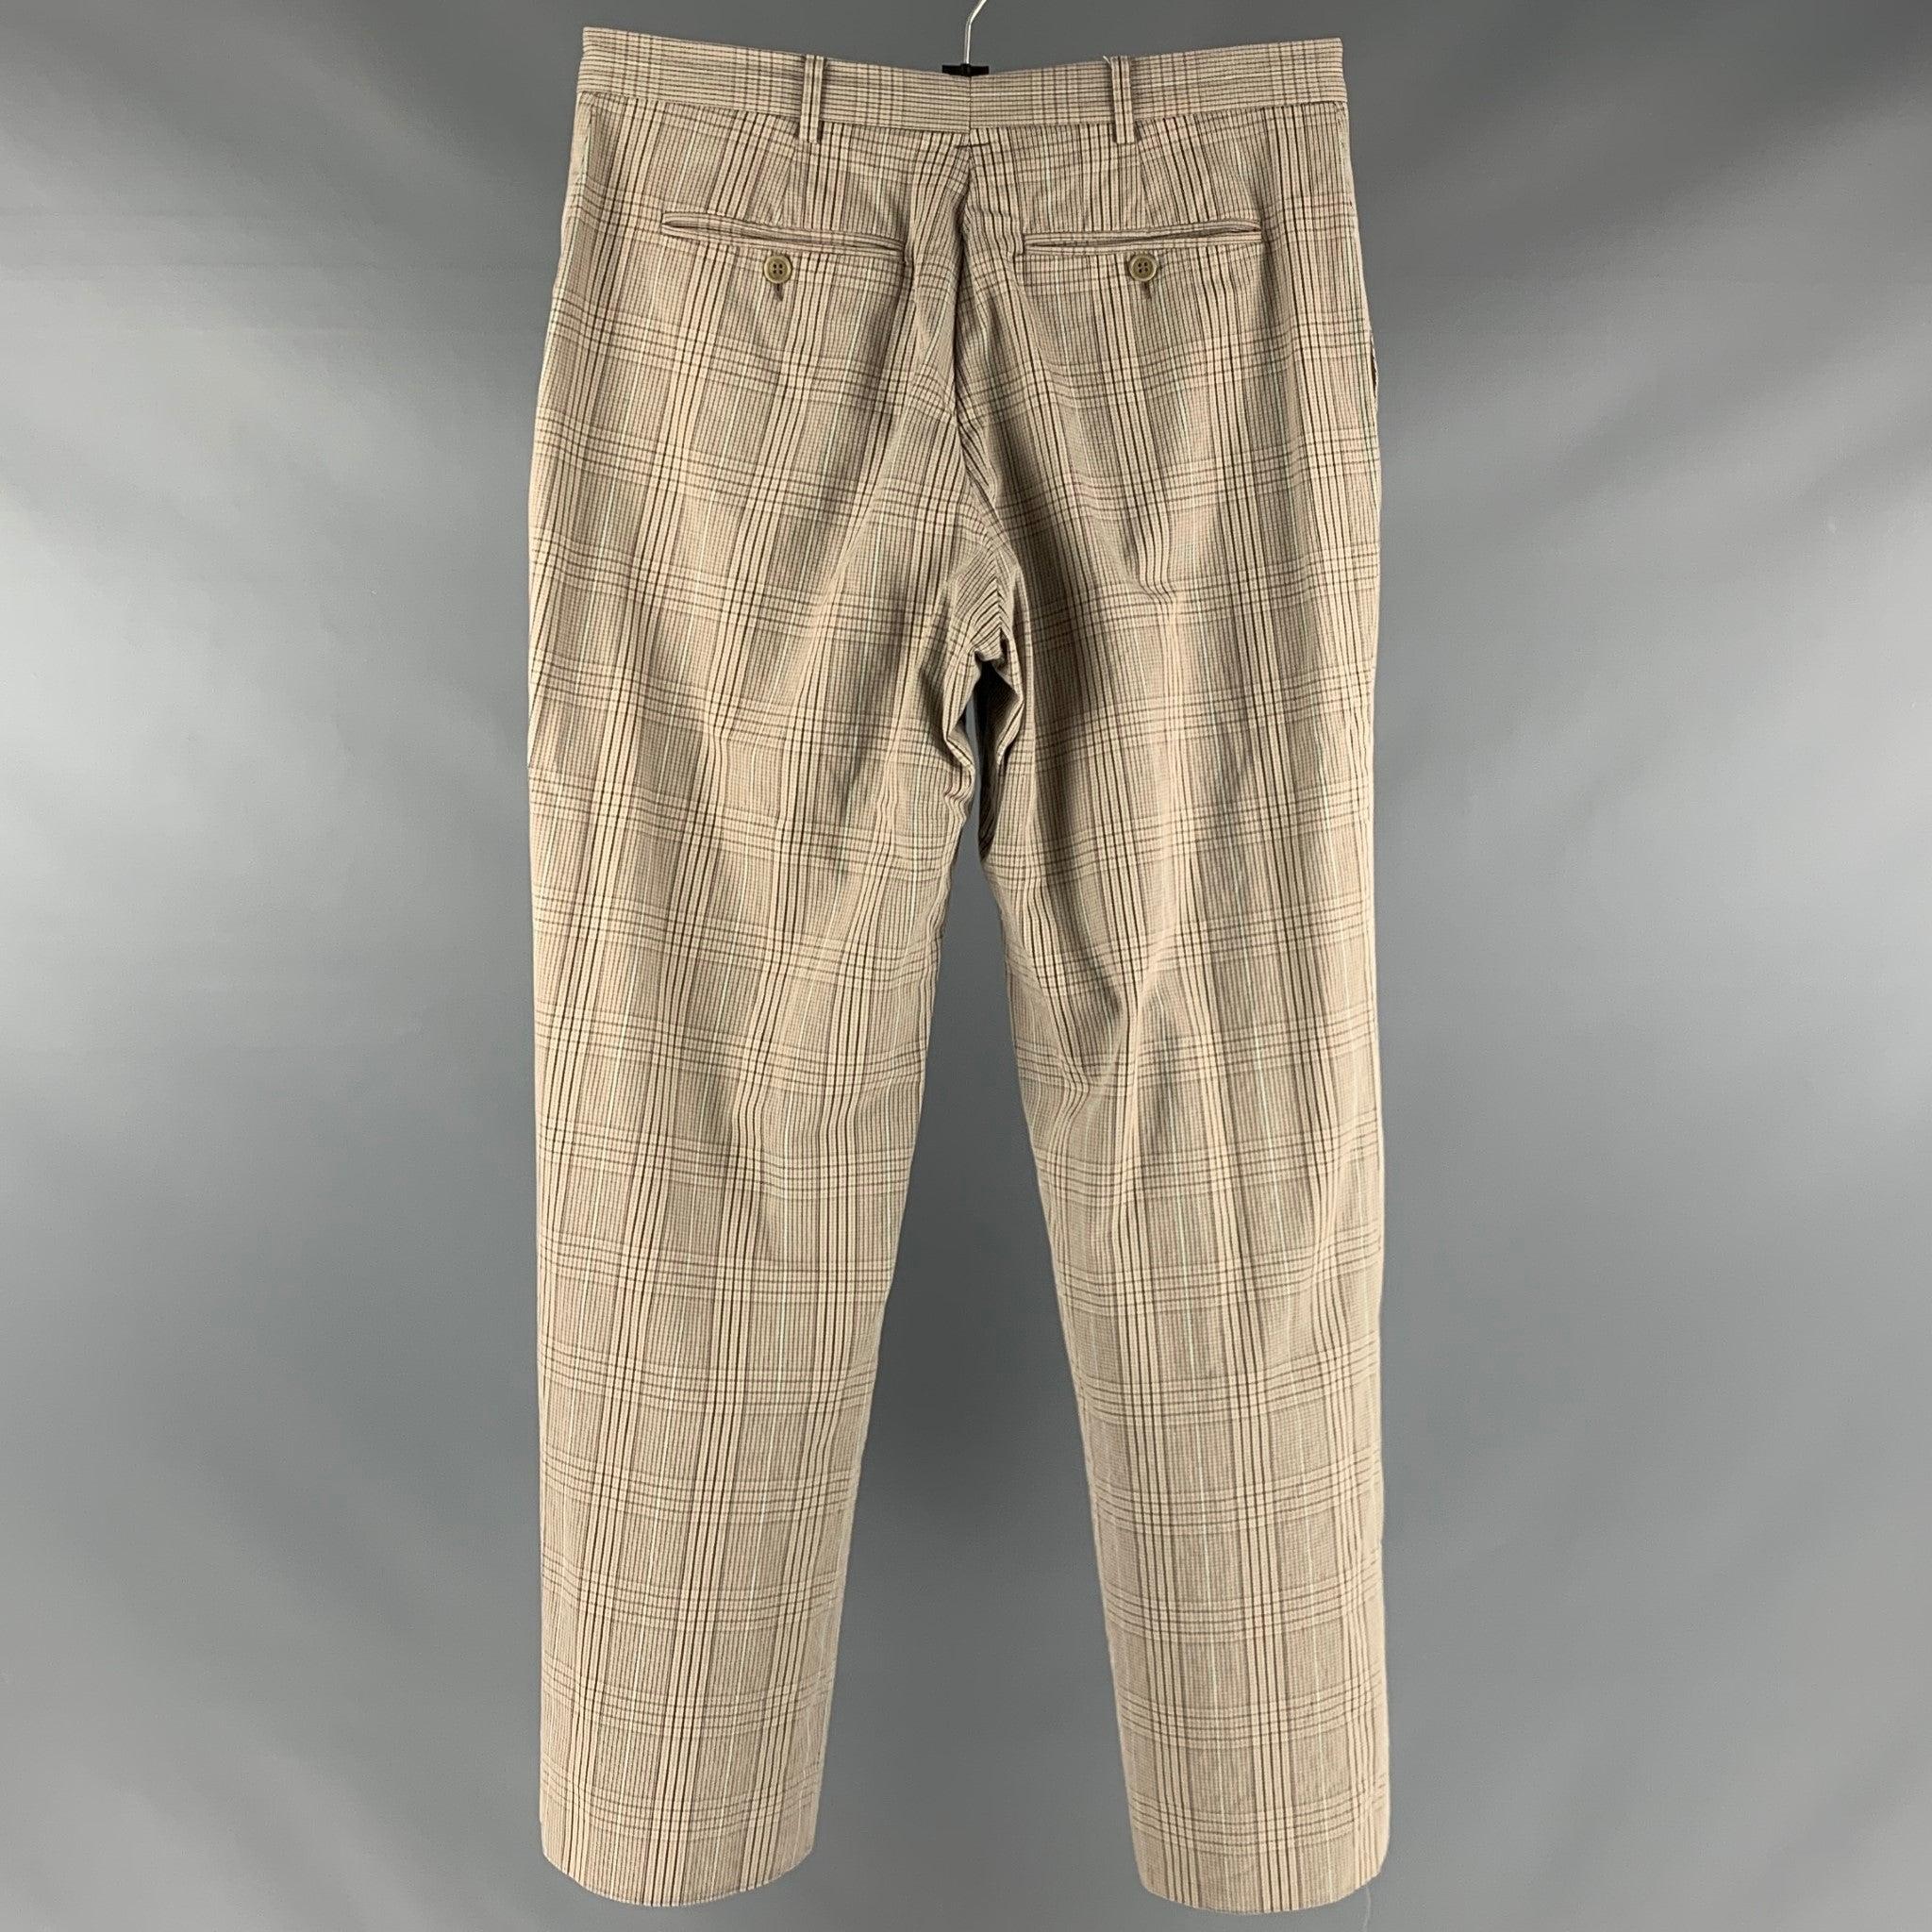 PAUL SMITH Size 30 Beige Brown Plaid Cotton Flat Front Dress Pants In Excellent Condition For Sale In San Francisco, CA